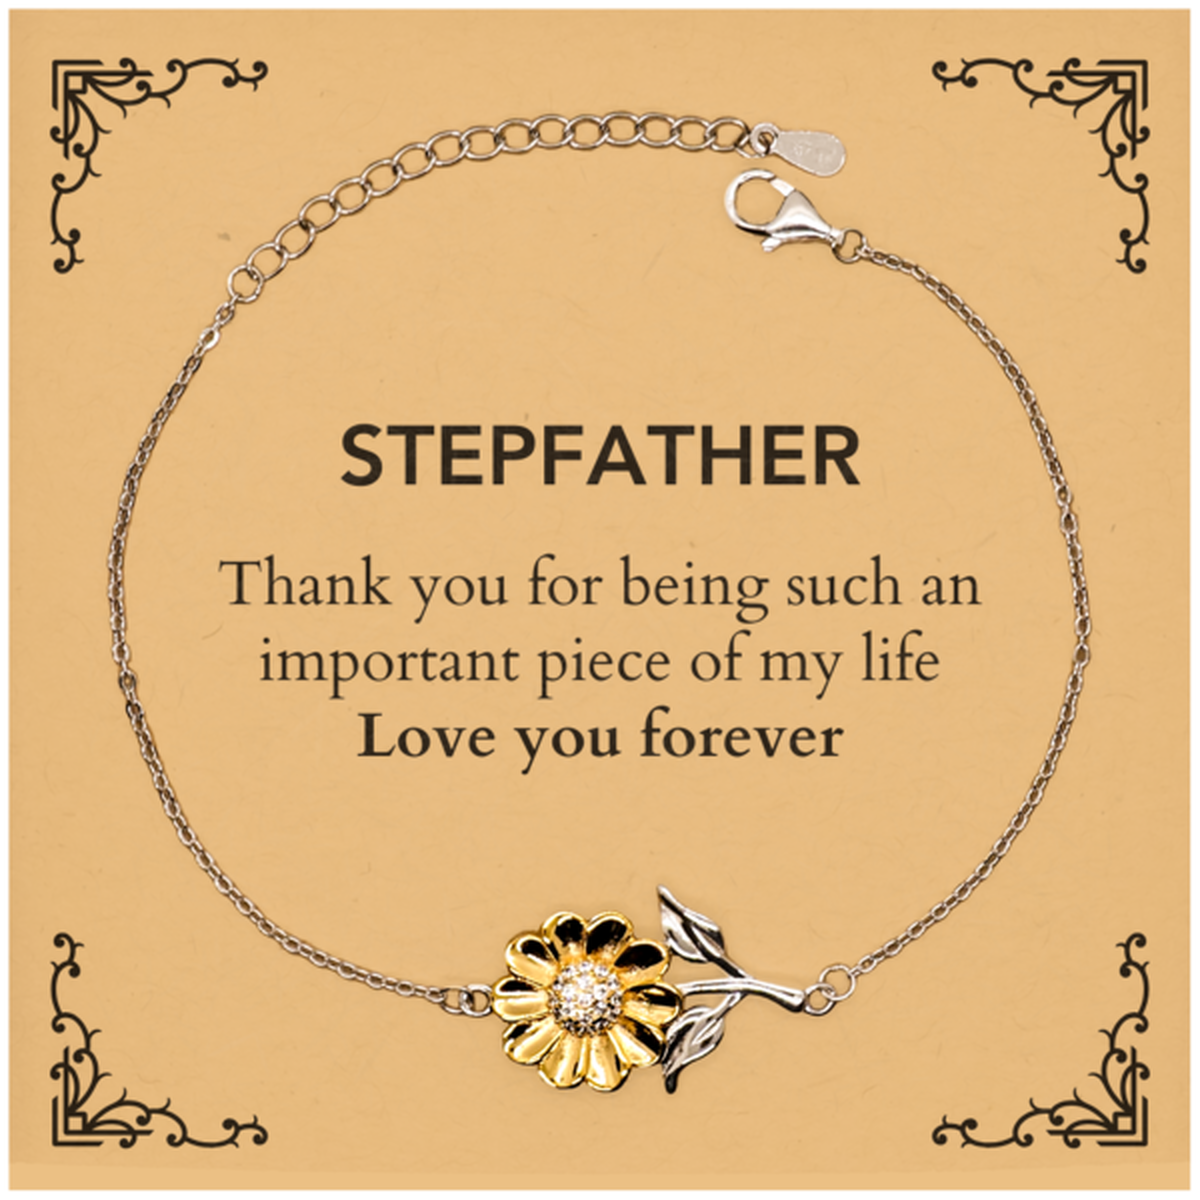 Appropriate Stepfather Sunflower Bracelet Epic Birthday Gifts for Stepfather Thank you for being such an important piece of my life Stepfather Christmas Mothers Fathers Day